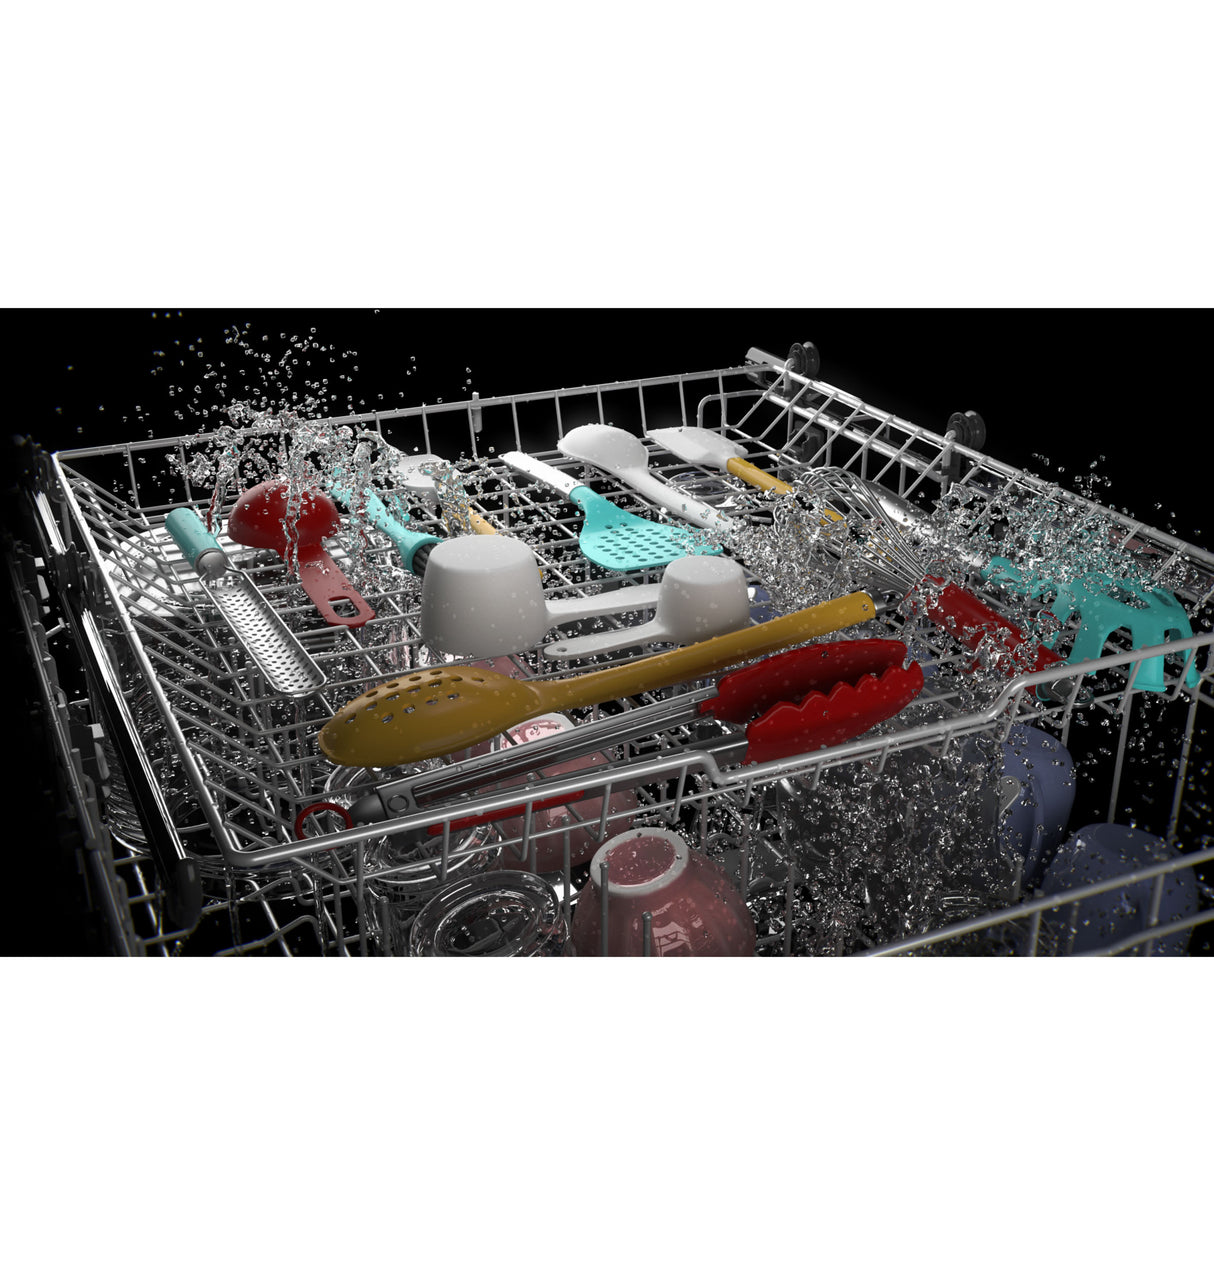 GE(R) ENERGY STAR(R) Top Control with Plastic Interior Dishwasher with Sanitize Cycle & Dry Boost - (GDT630PYRFS)